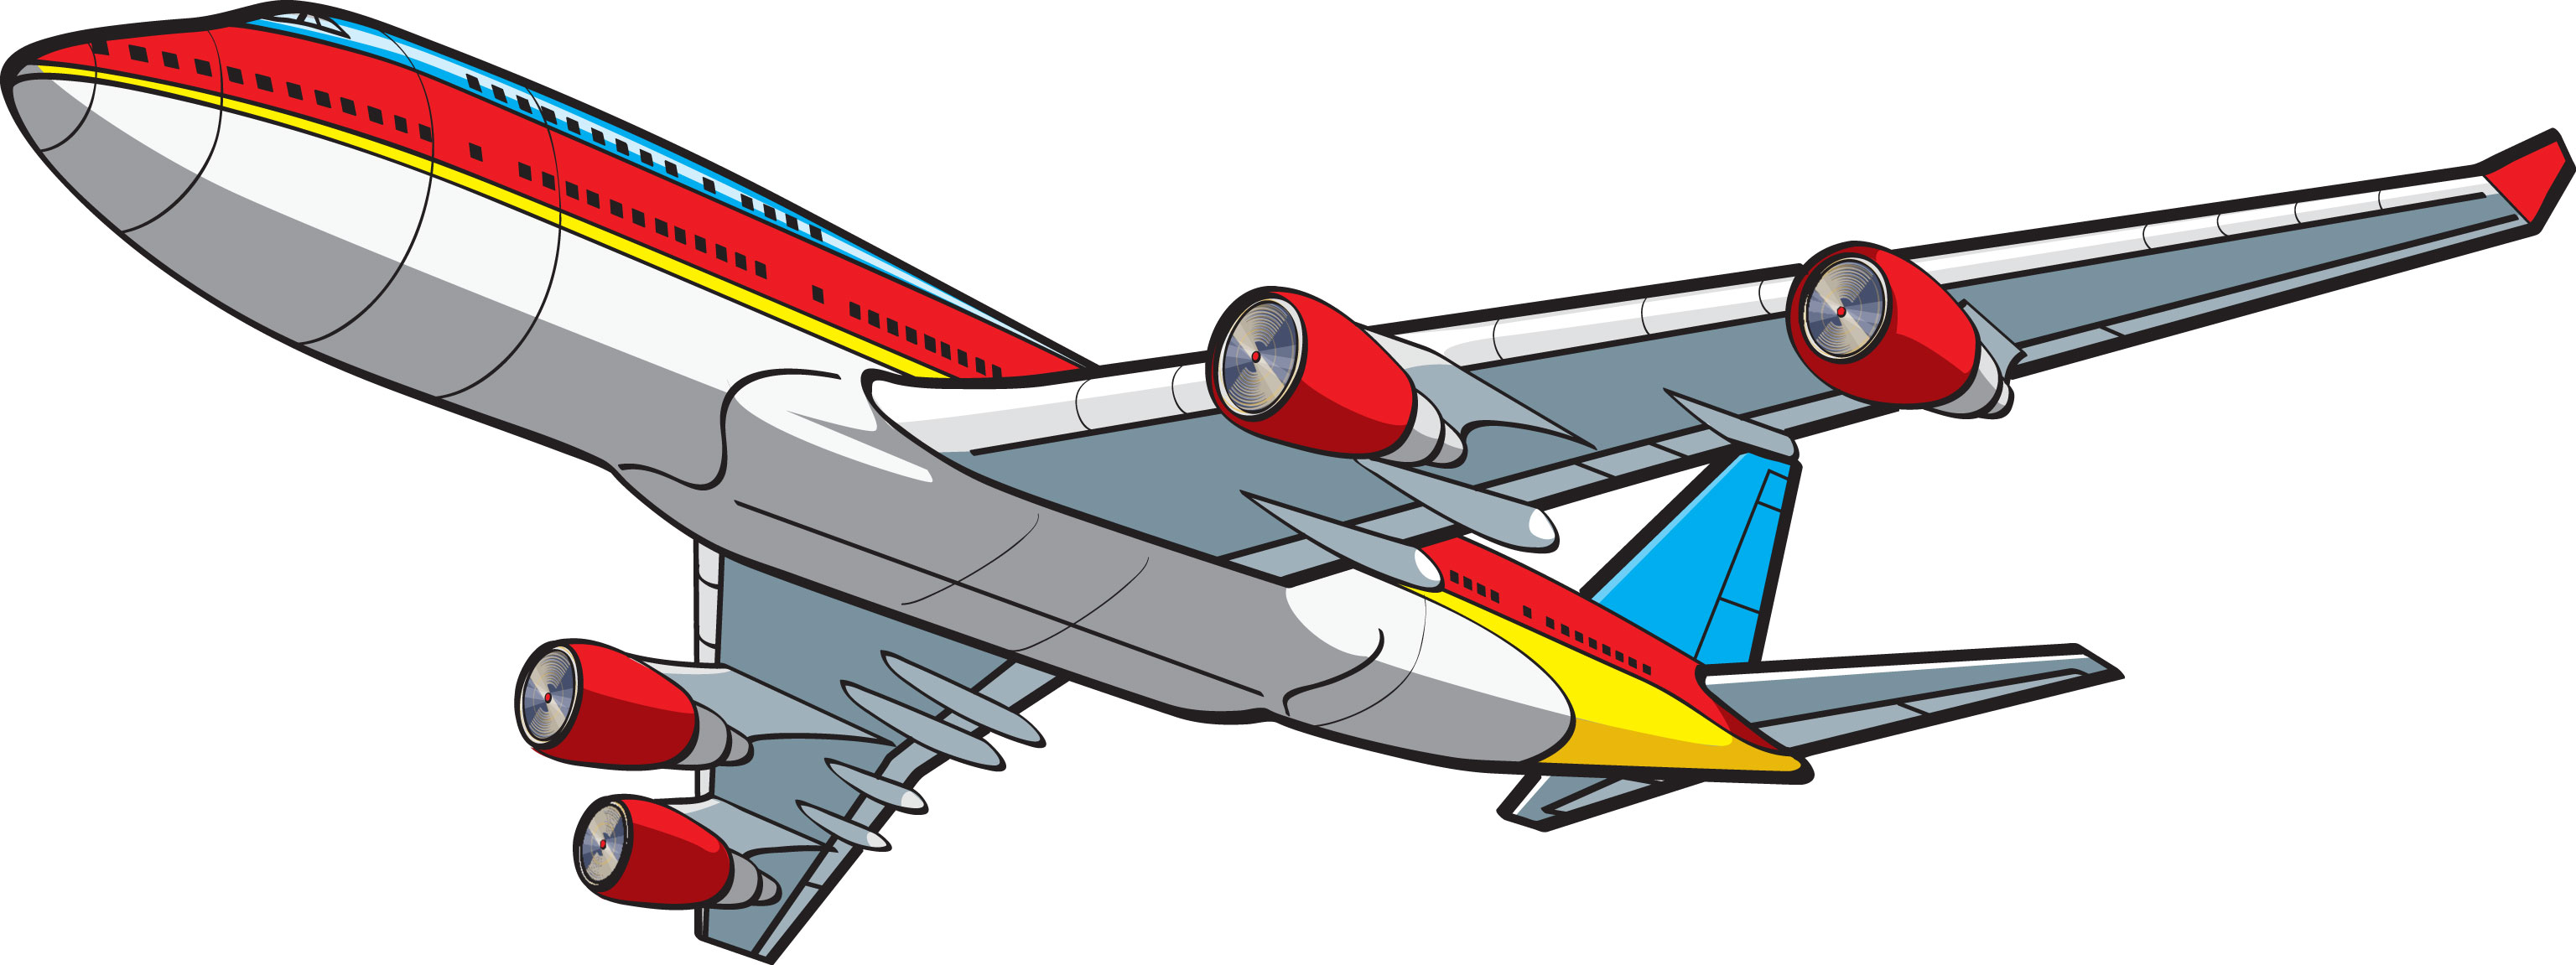 boeing 747 clipart